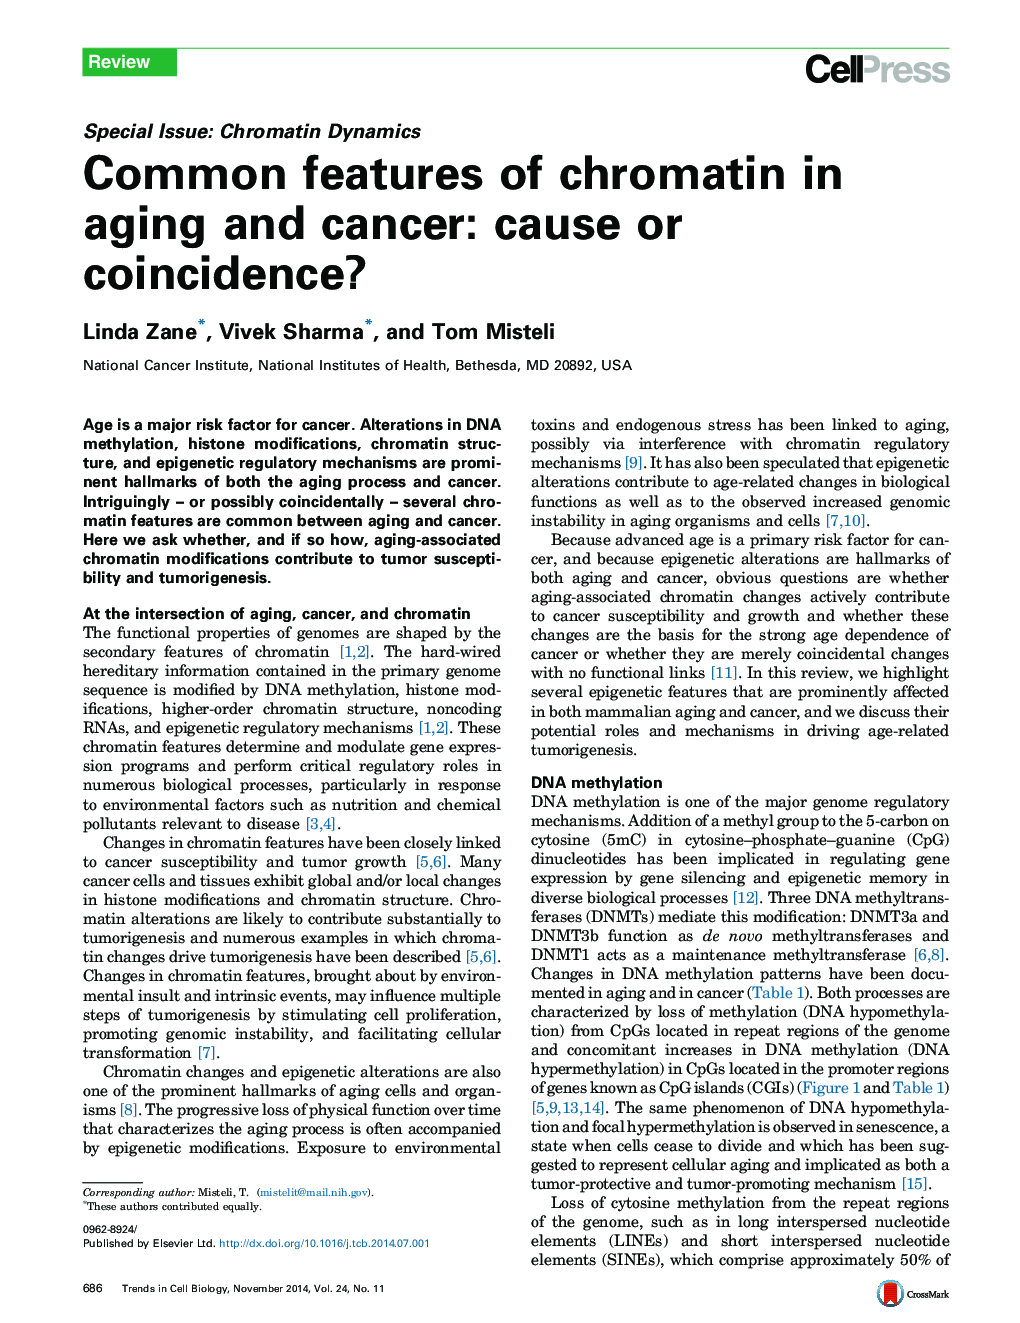 Common features of chromatin in aging and cancer: cause or coincidence?